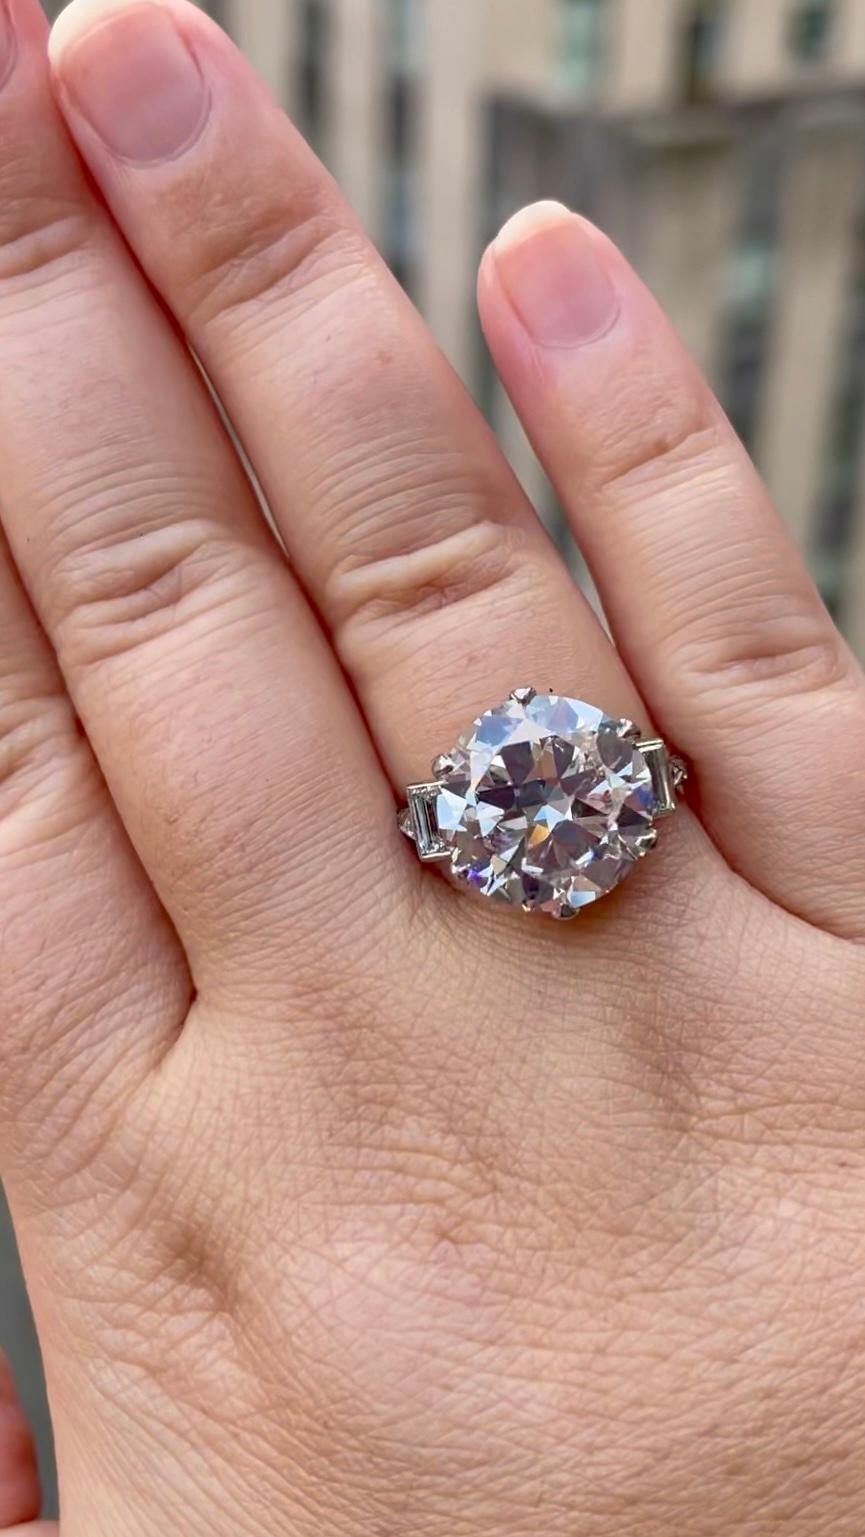 This lovely antique 7.15 carat European cut diamond is a rare and beautiful piece. Graded by GIA as K color and VVS2 clarity, this diamond is bright, lively and brilliant. The larger facets characteristic of an antique cut diamond give this stone a